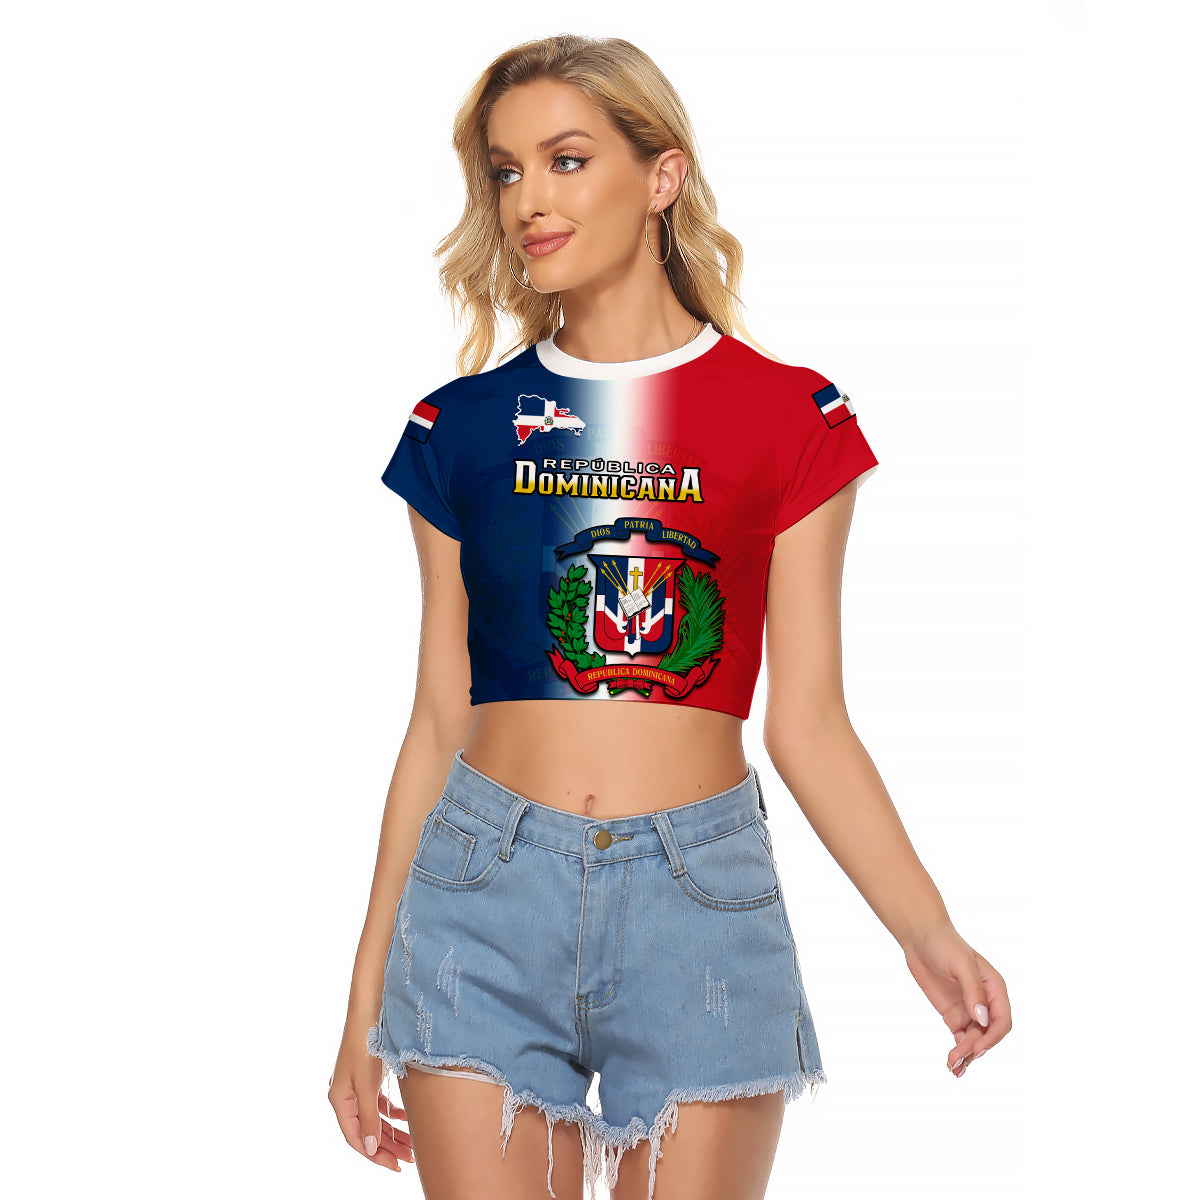 dominican-republic-raglan-cropped-t-shirt-dominicana-coat-of-arms-gradient-style